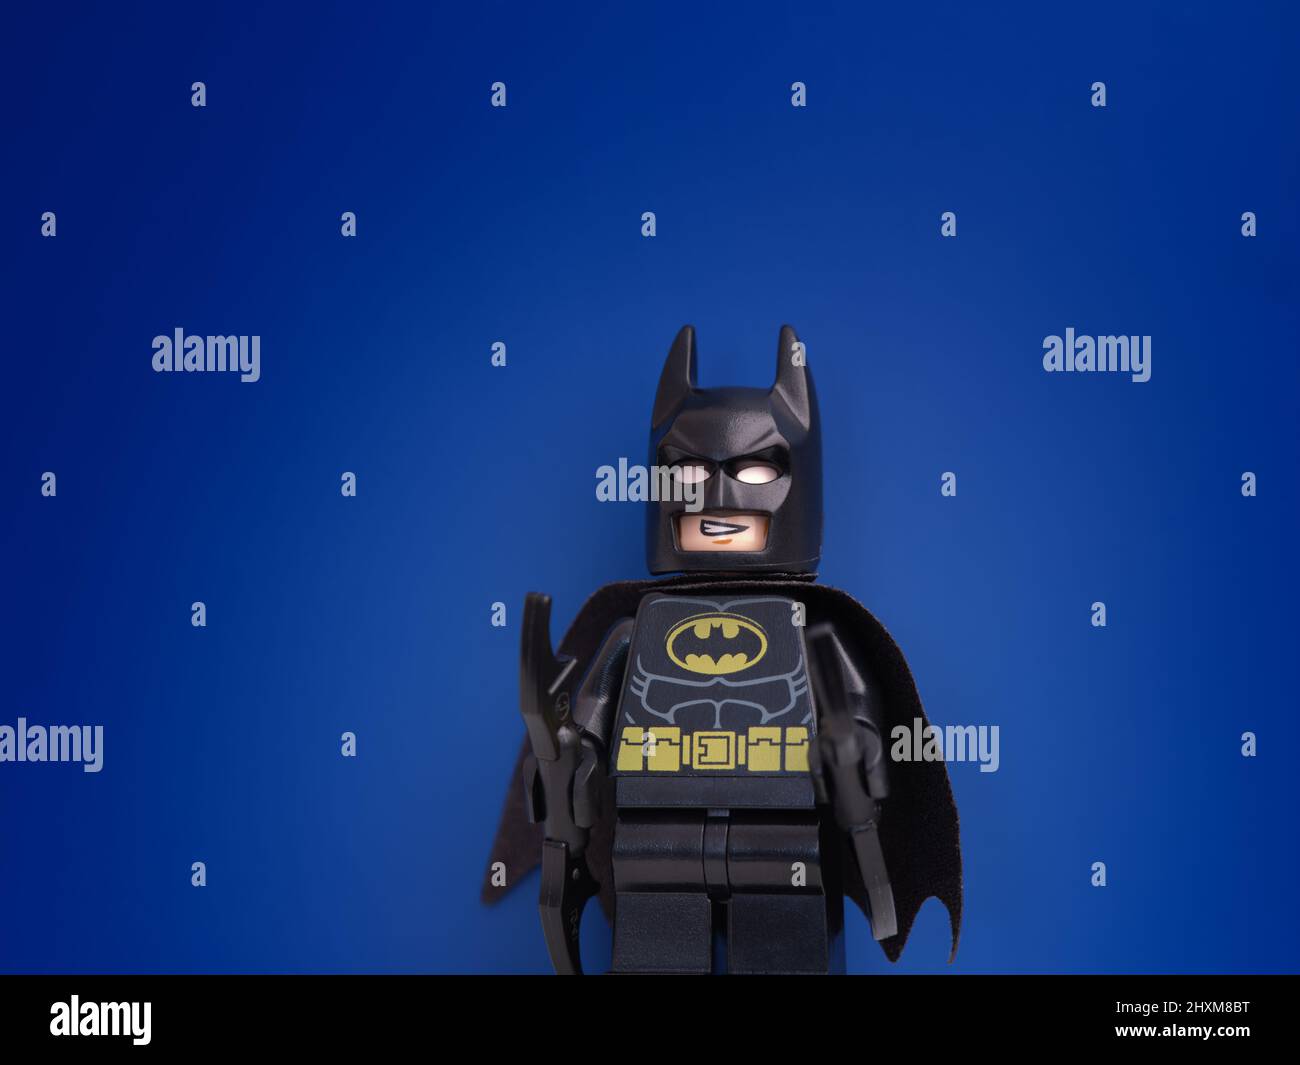 Lego Movie Figure High Resolution Stock Photography and Images - Alamy